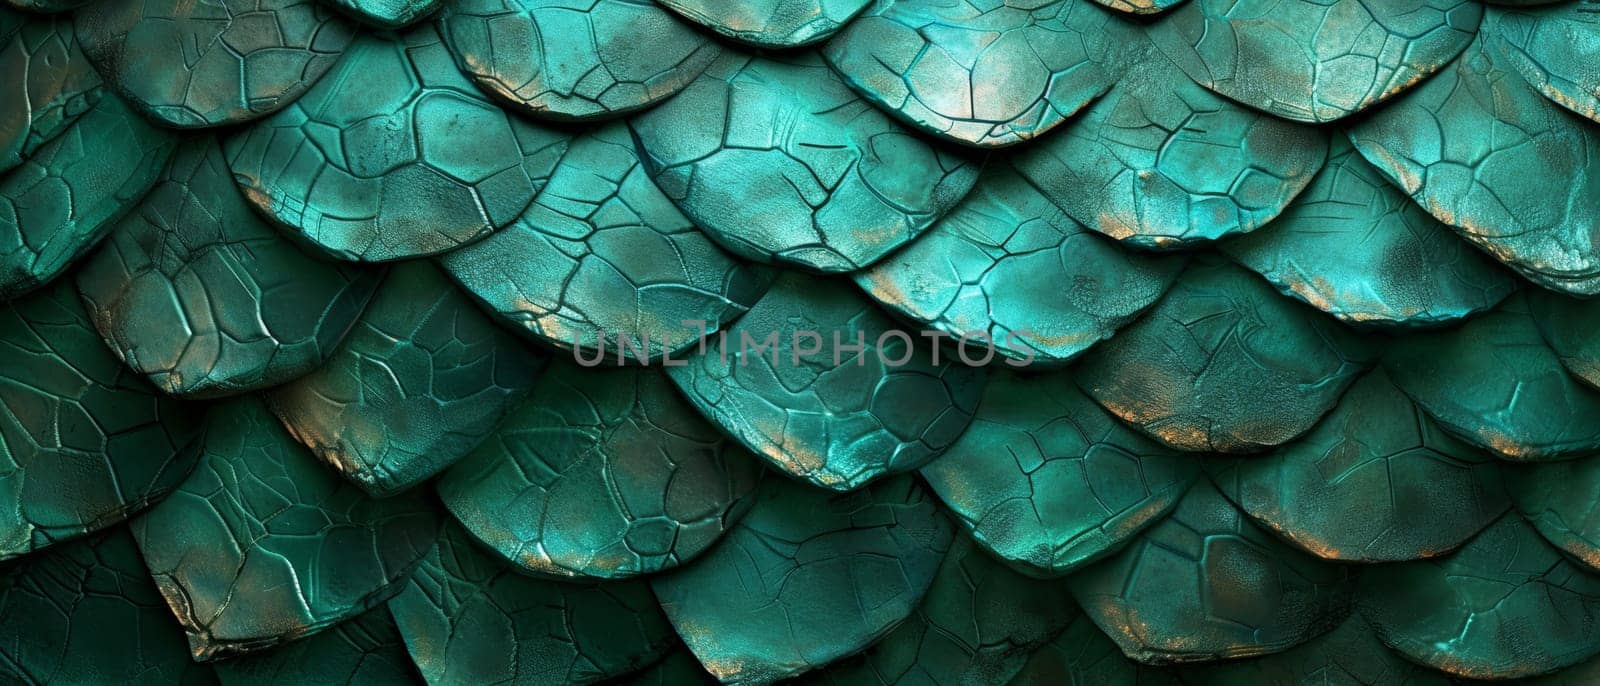 Green dragon scale pattern close-up - luxury background texture for wallpaper